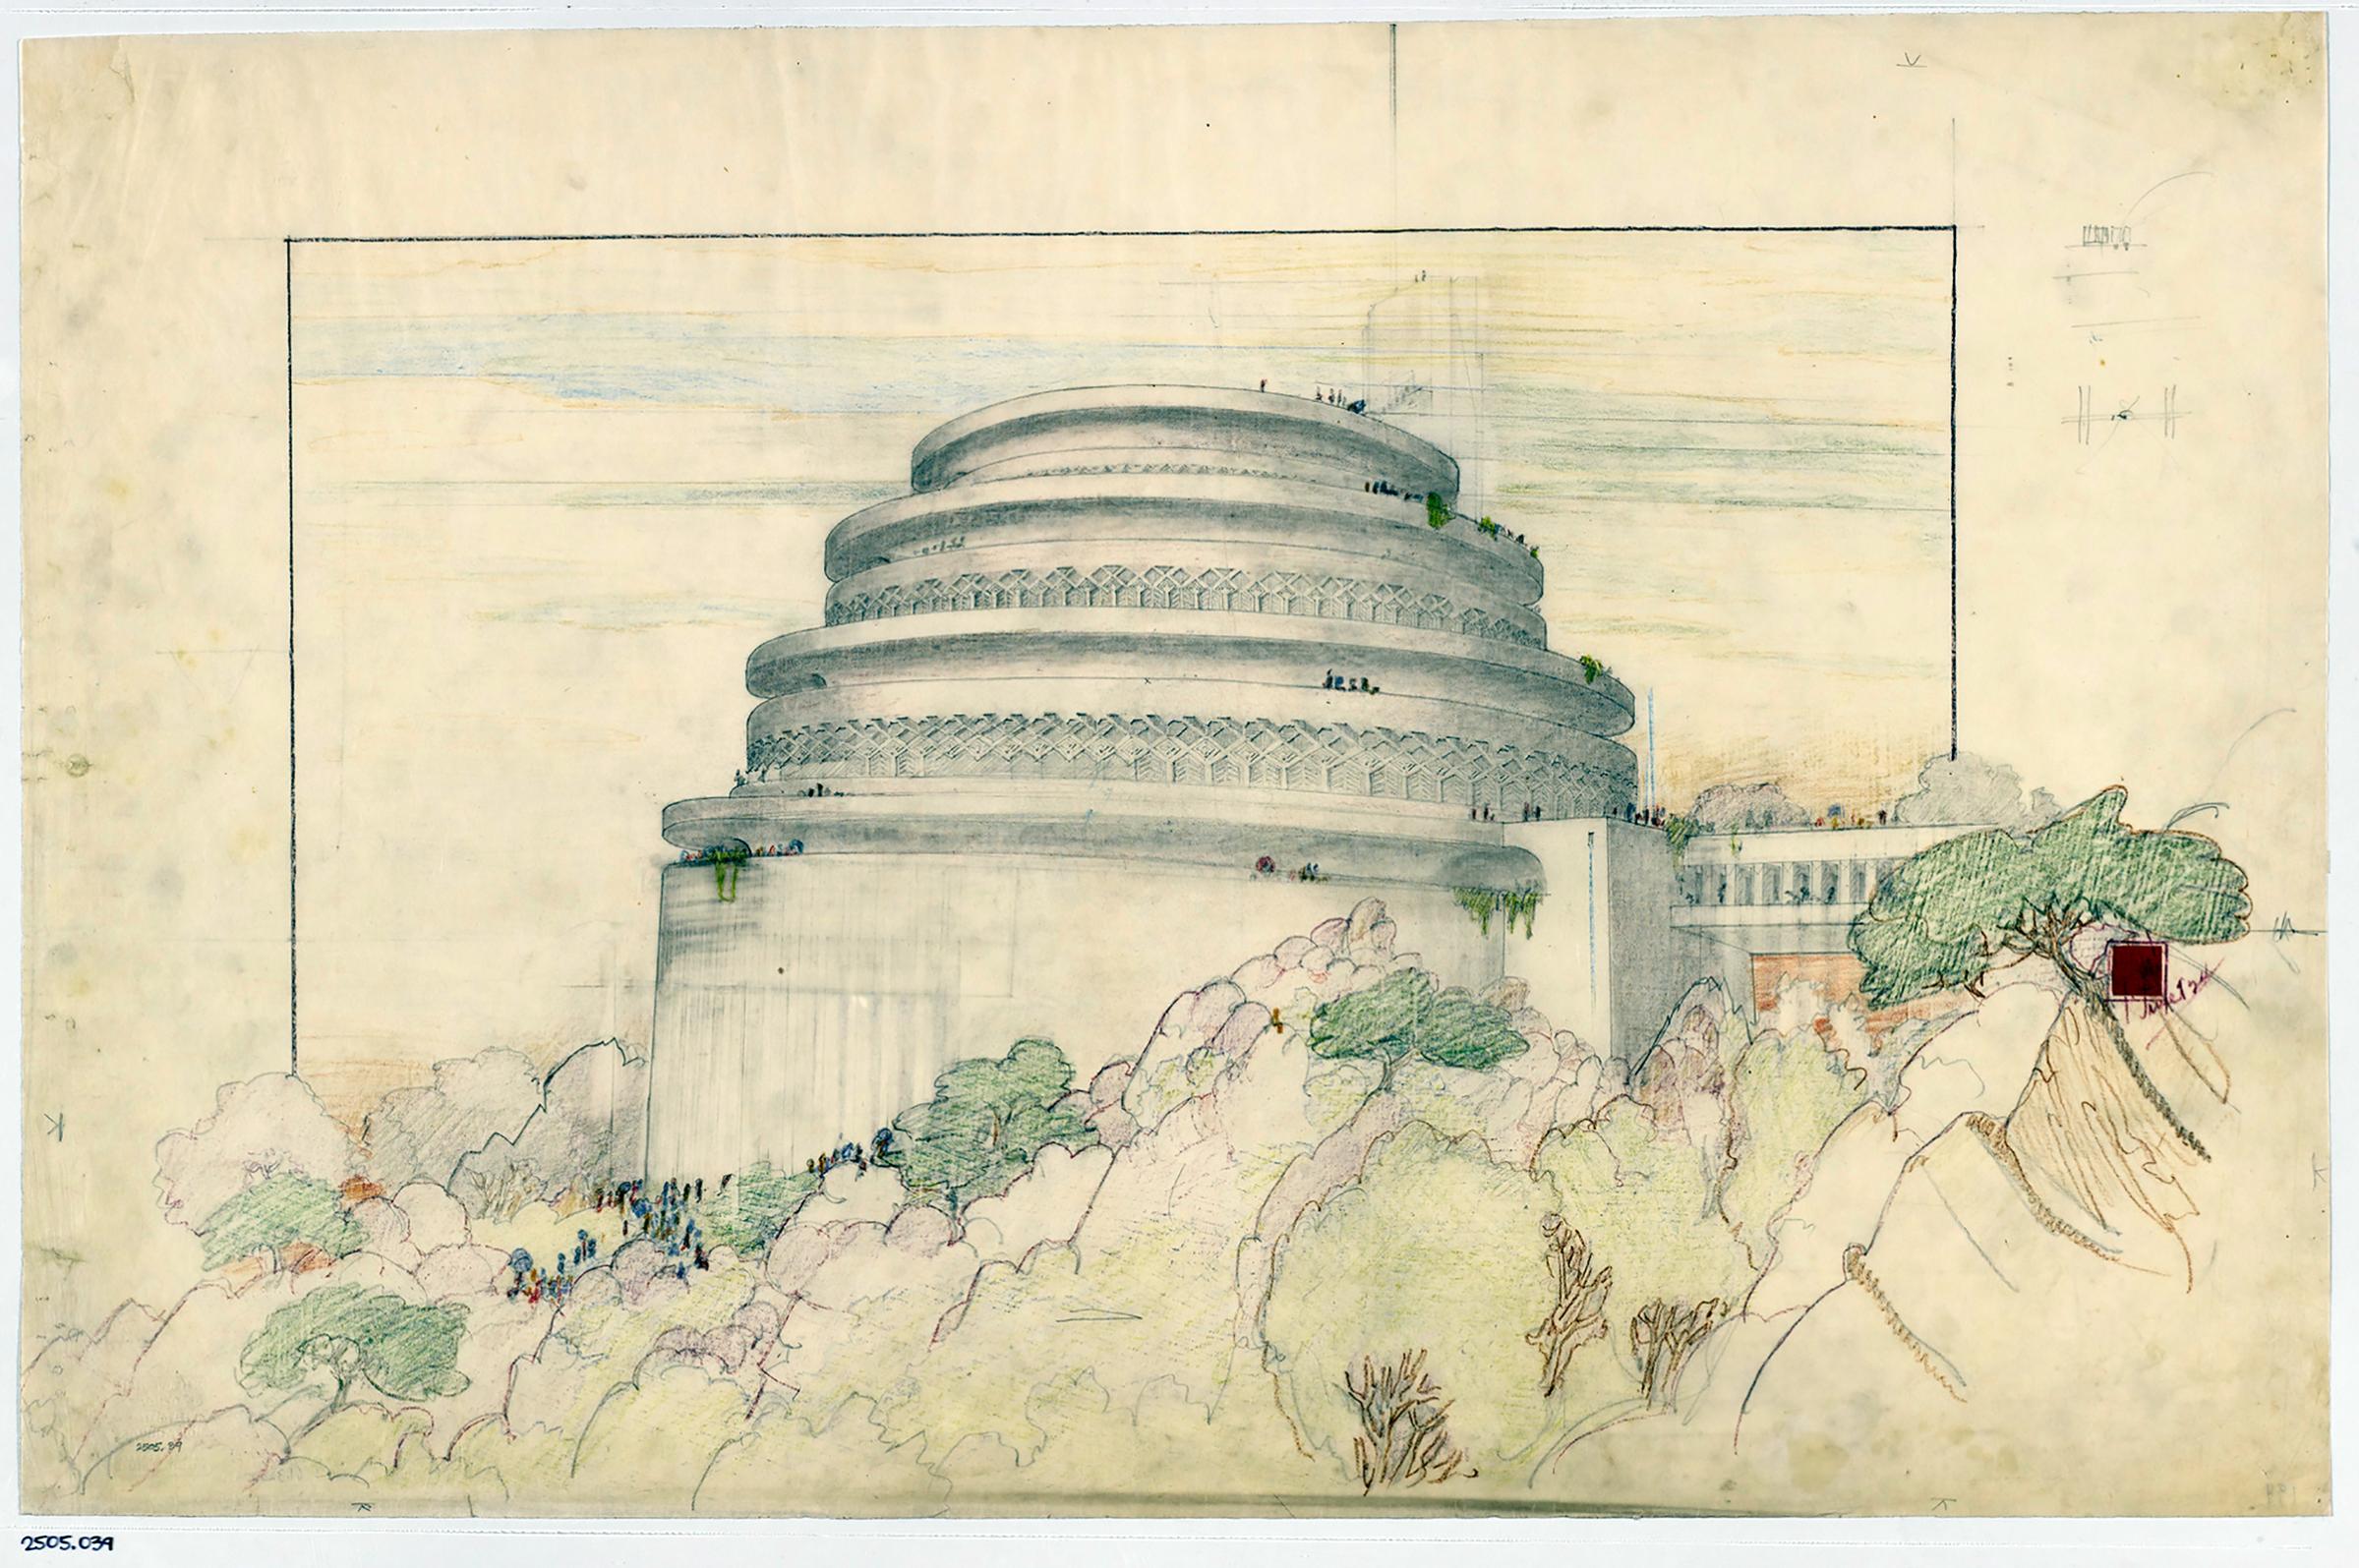 Frank Lloyd Wright drawing from the Museum of Modern Art exhibition.